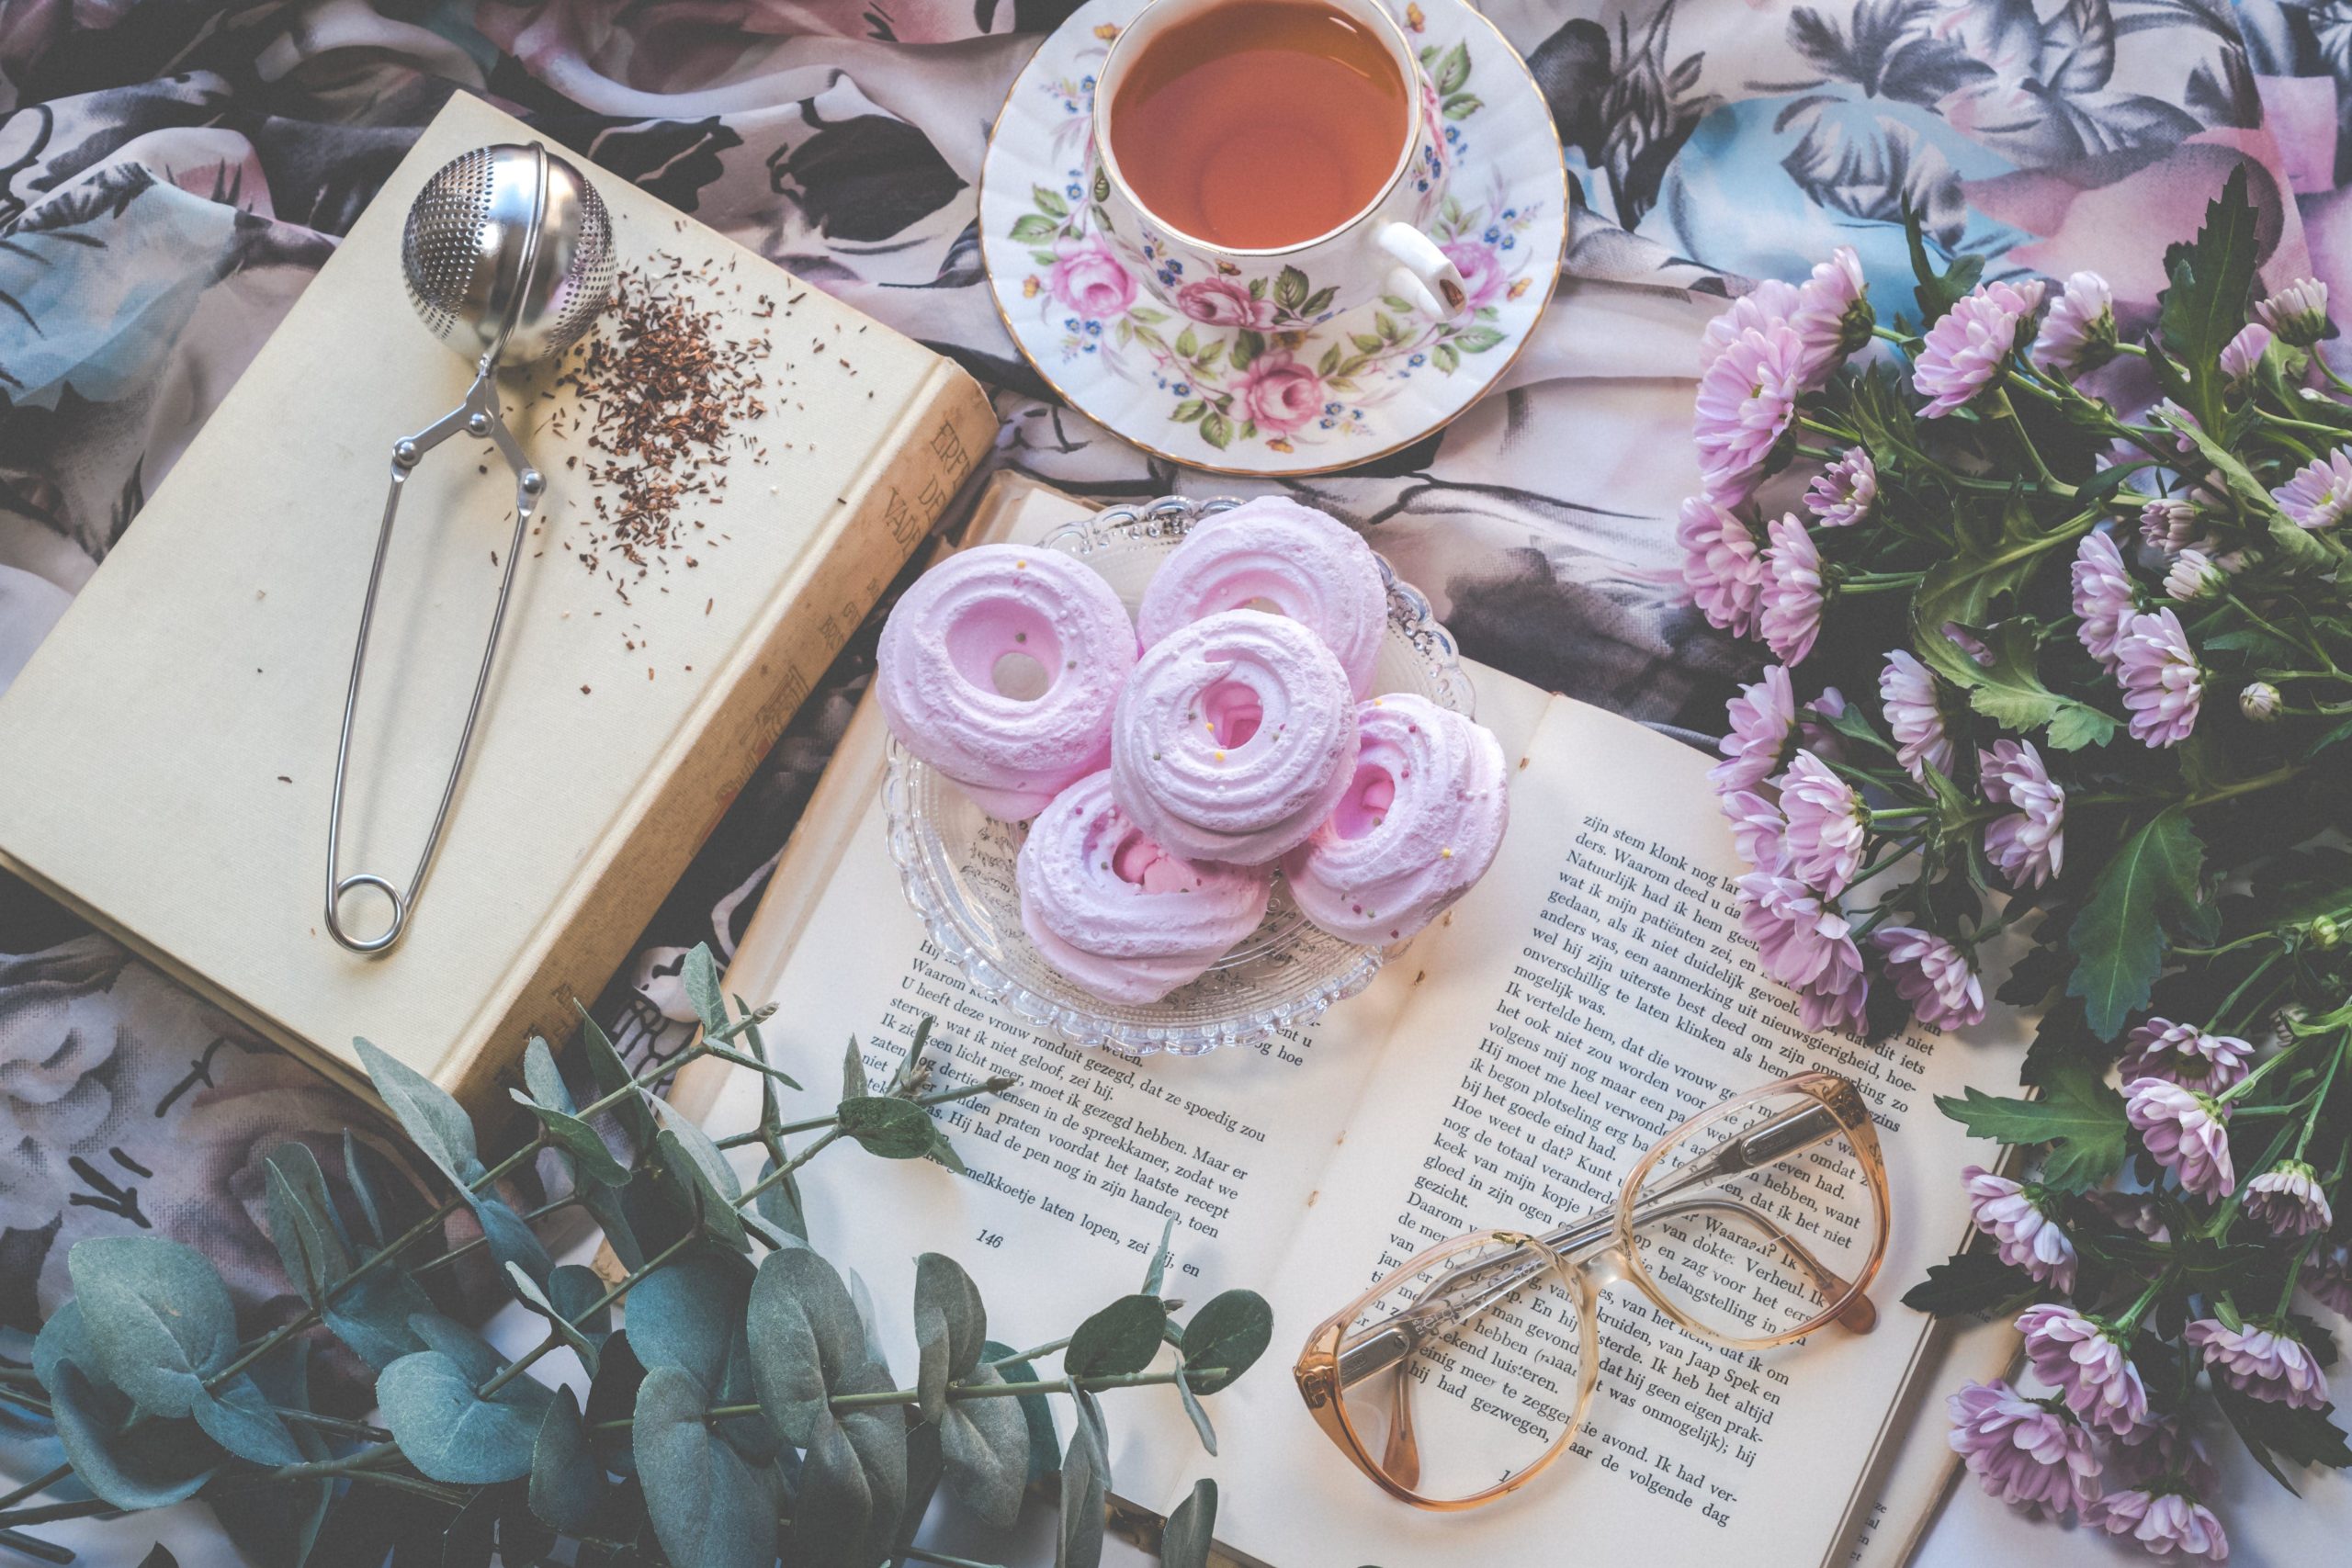 tea and a pink sweet treat on a book that is on a bed of flowers